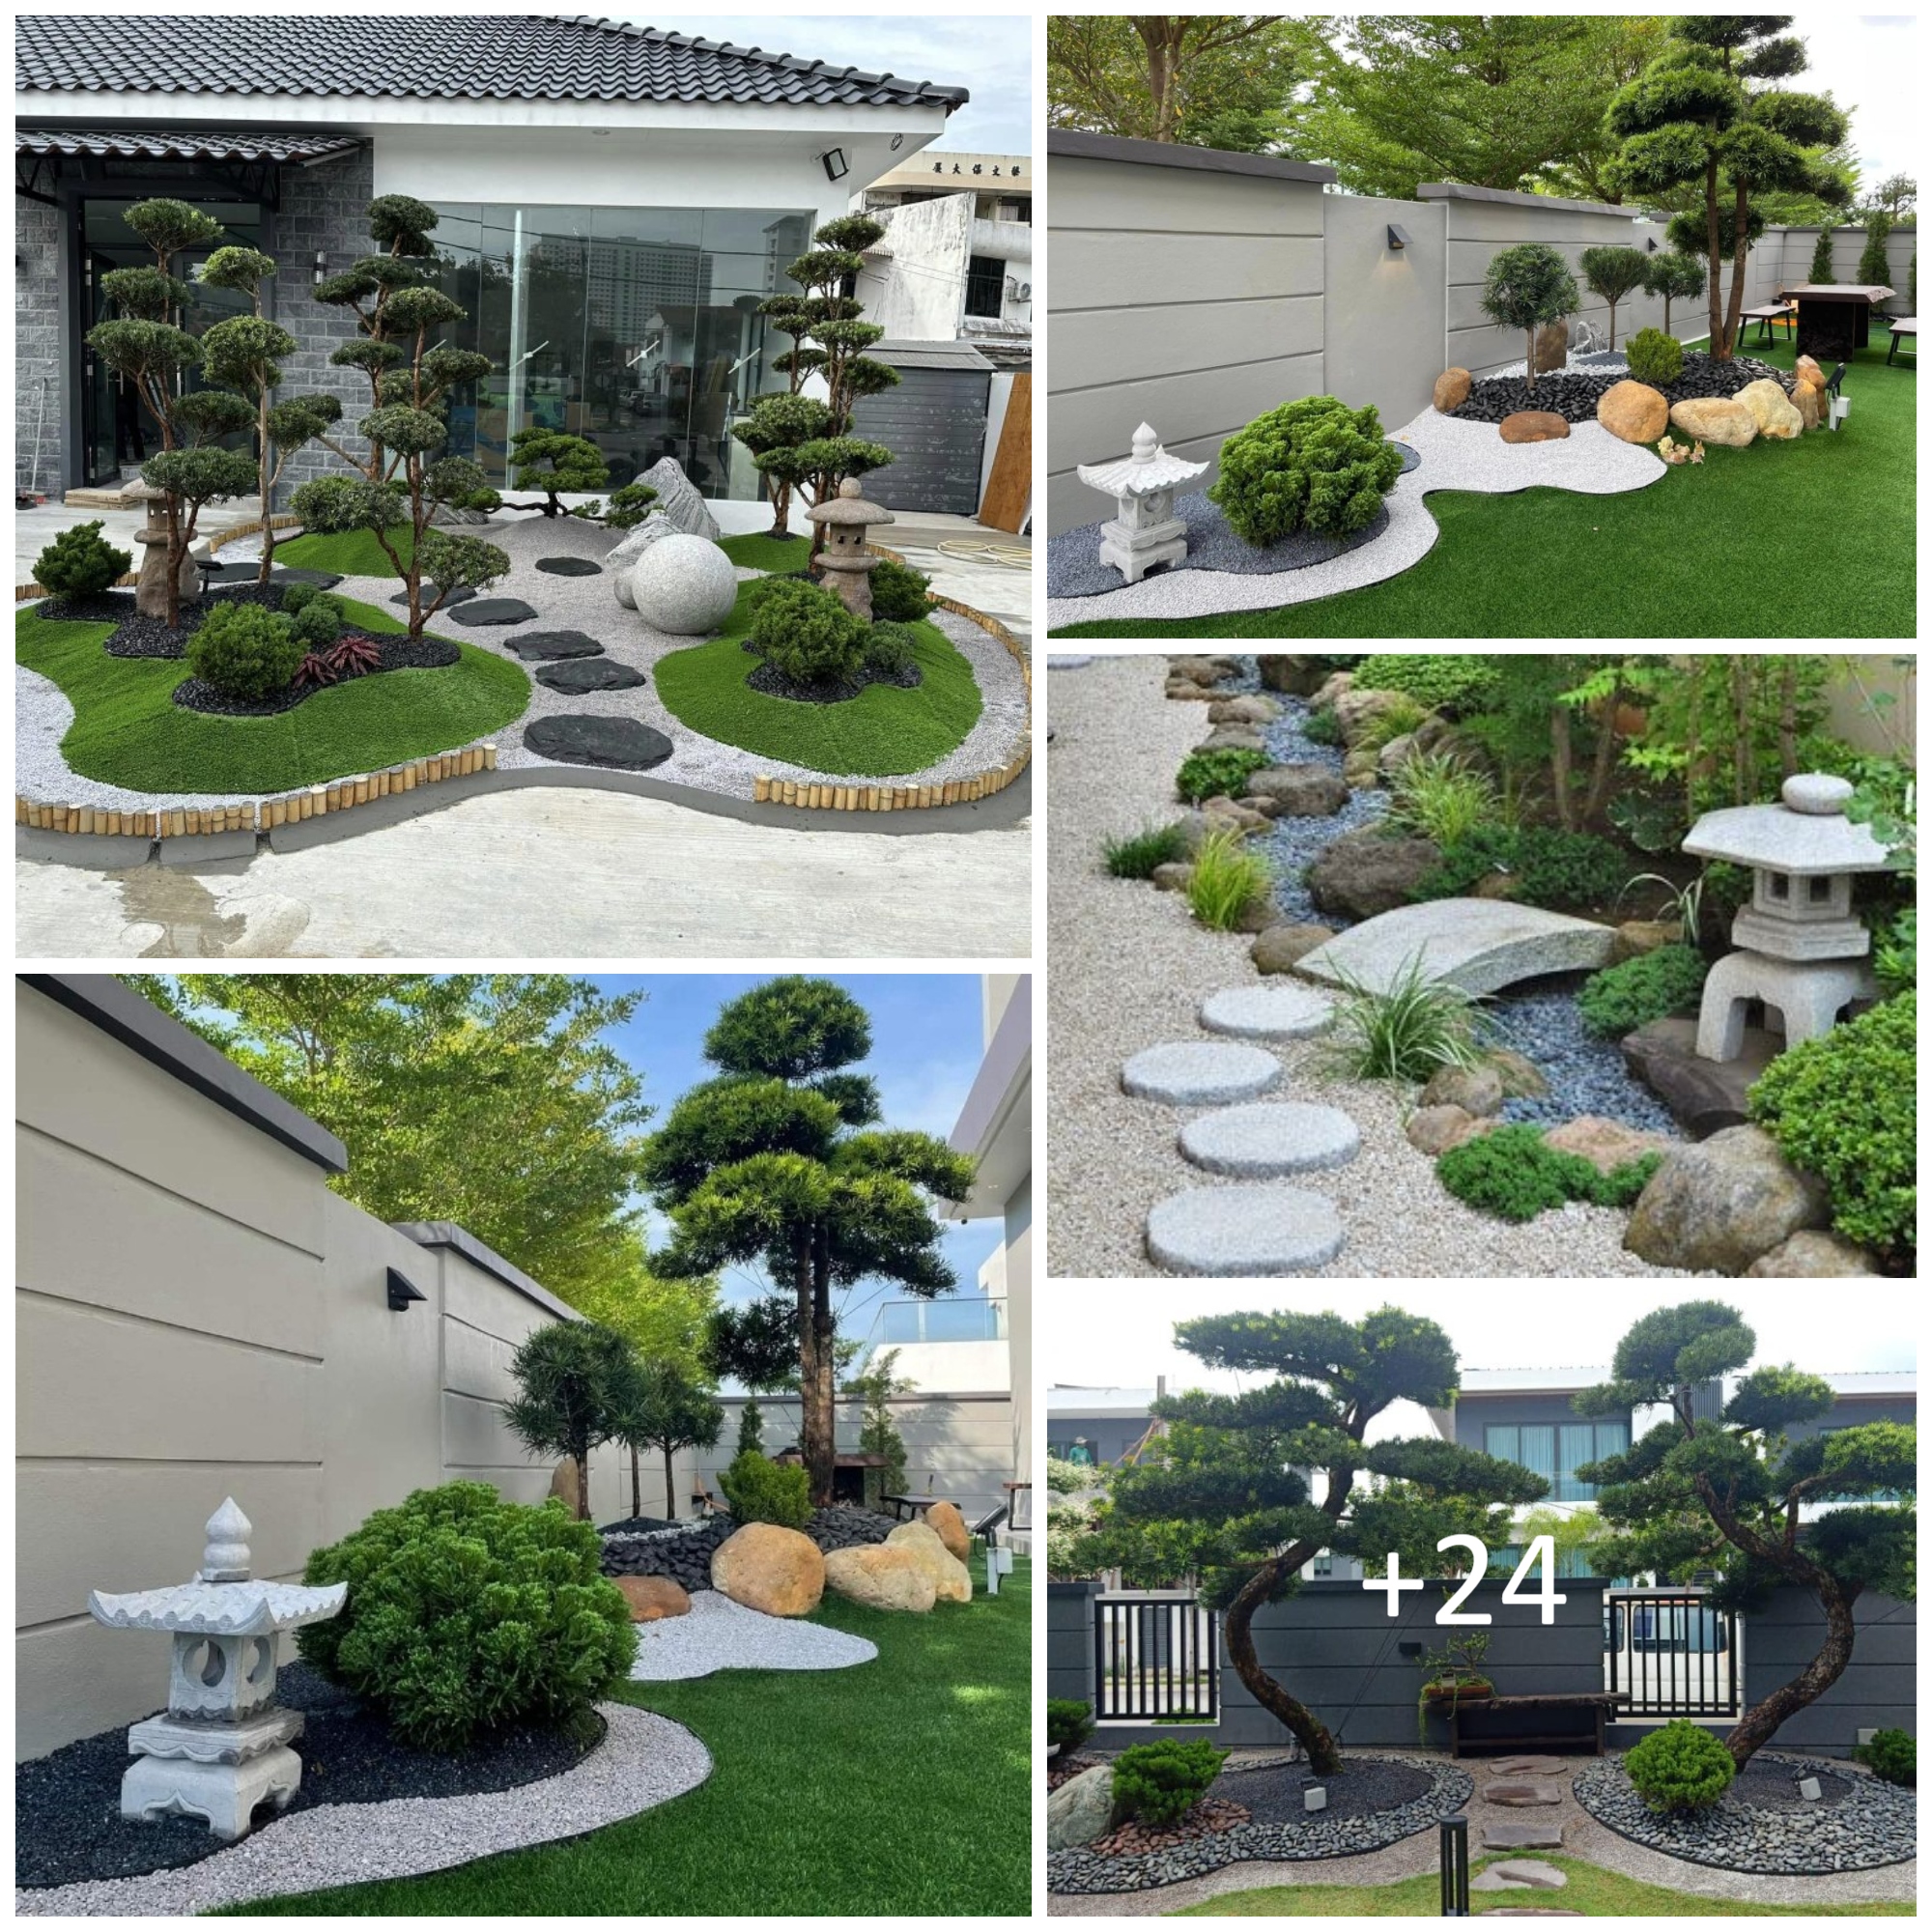 Japanese garden ideas that will bring Zen to your outdoor spaces